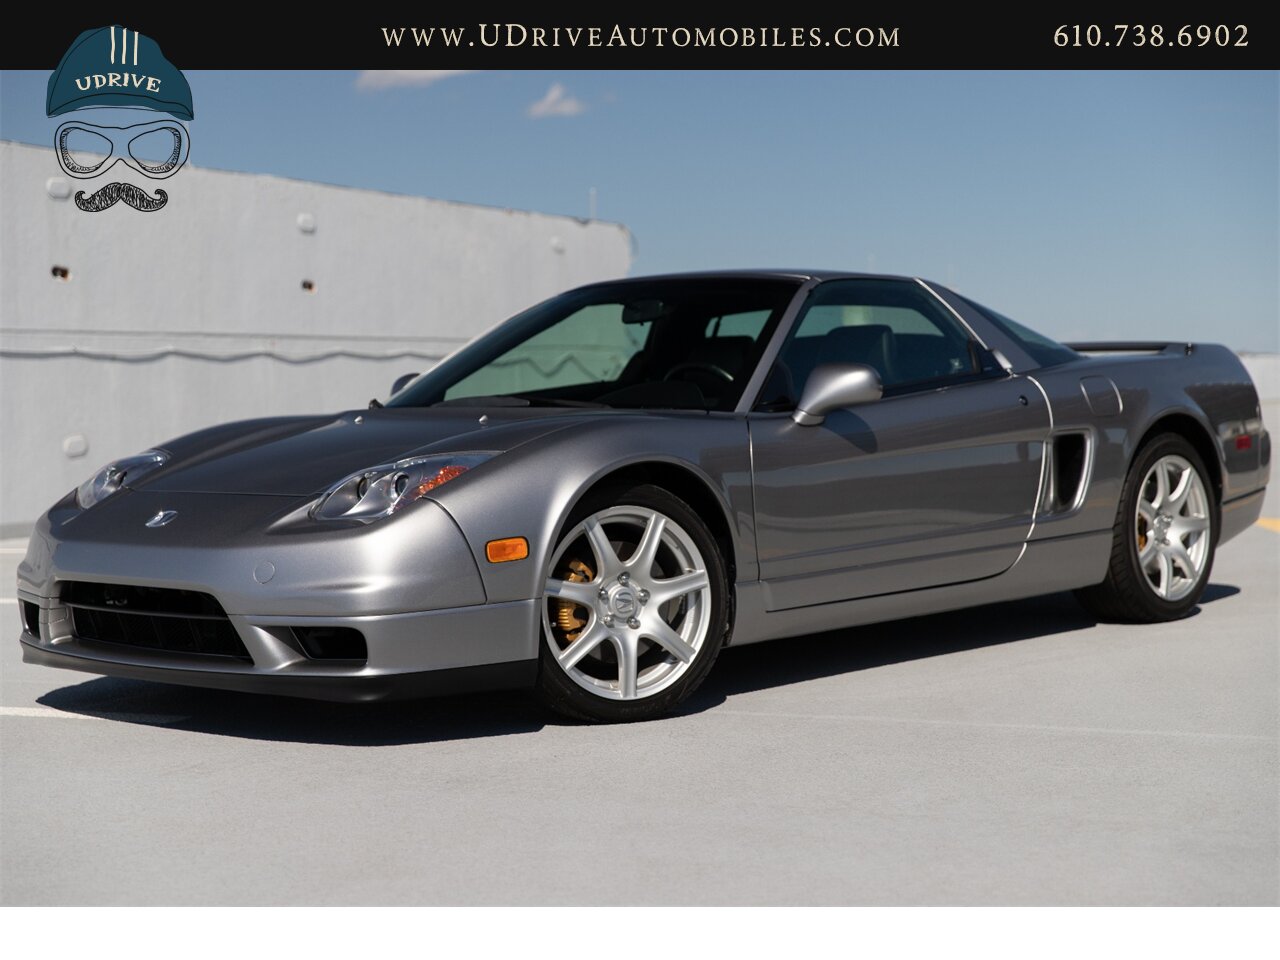 2002 Acura NSX NSX-T 9k Miles 6 Speed Manual Service History  Collector Grade - Photo 1 - West Chester, PA 19382